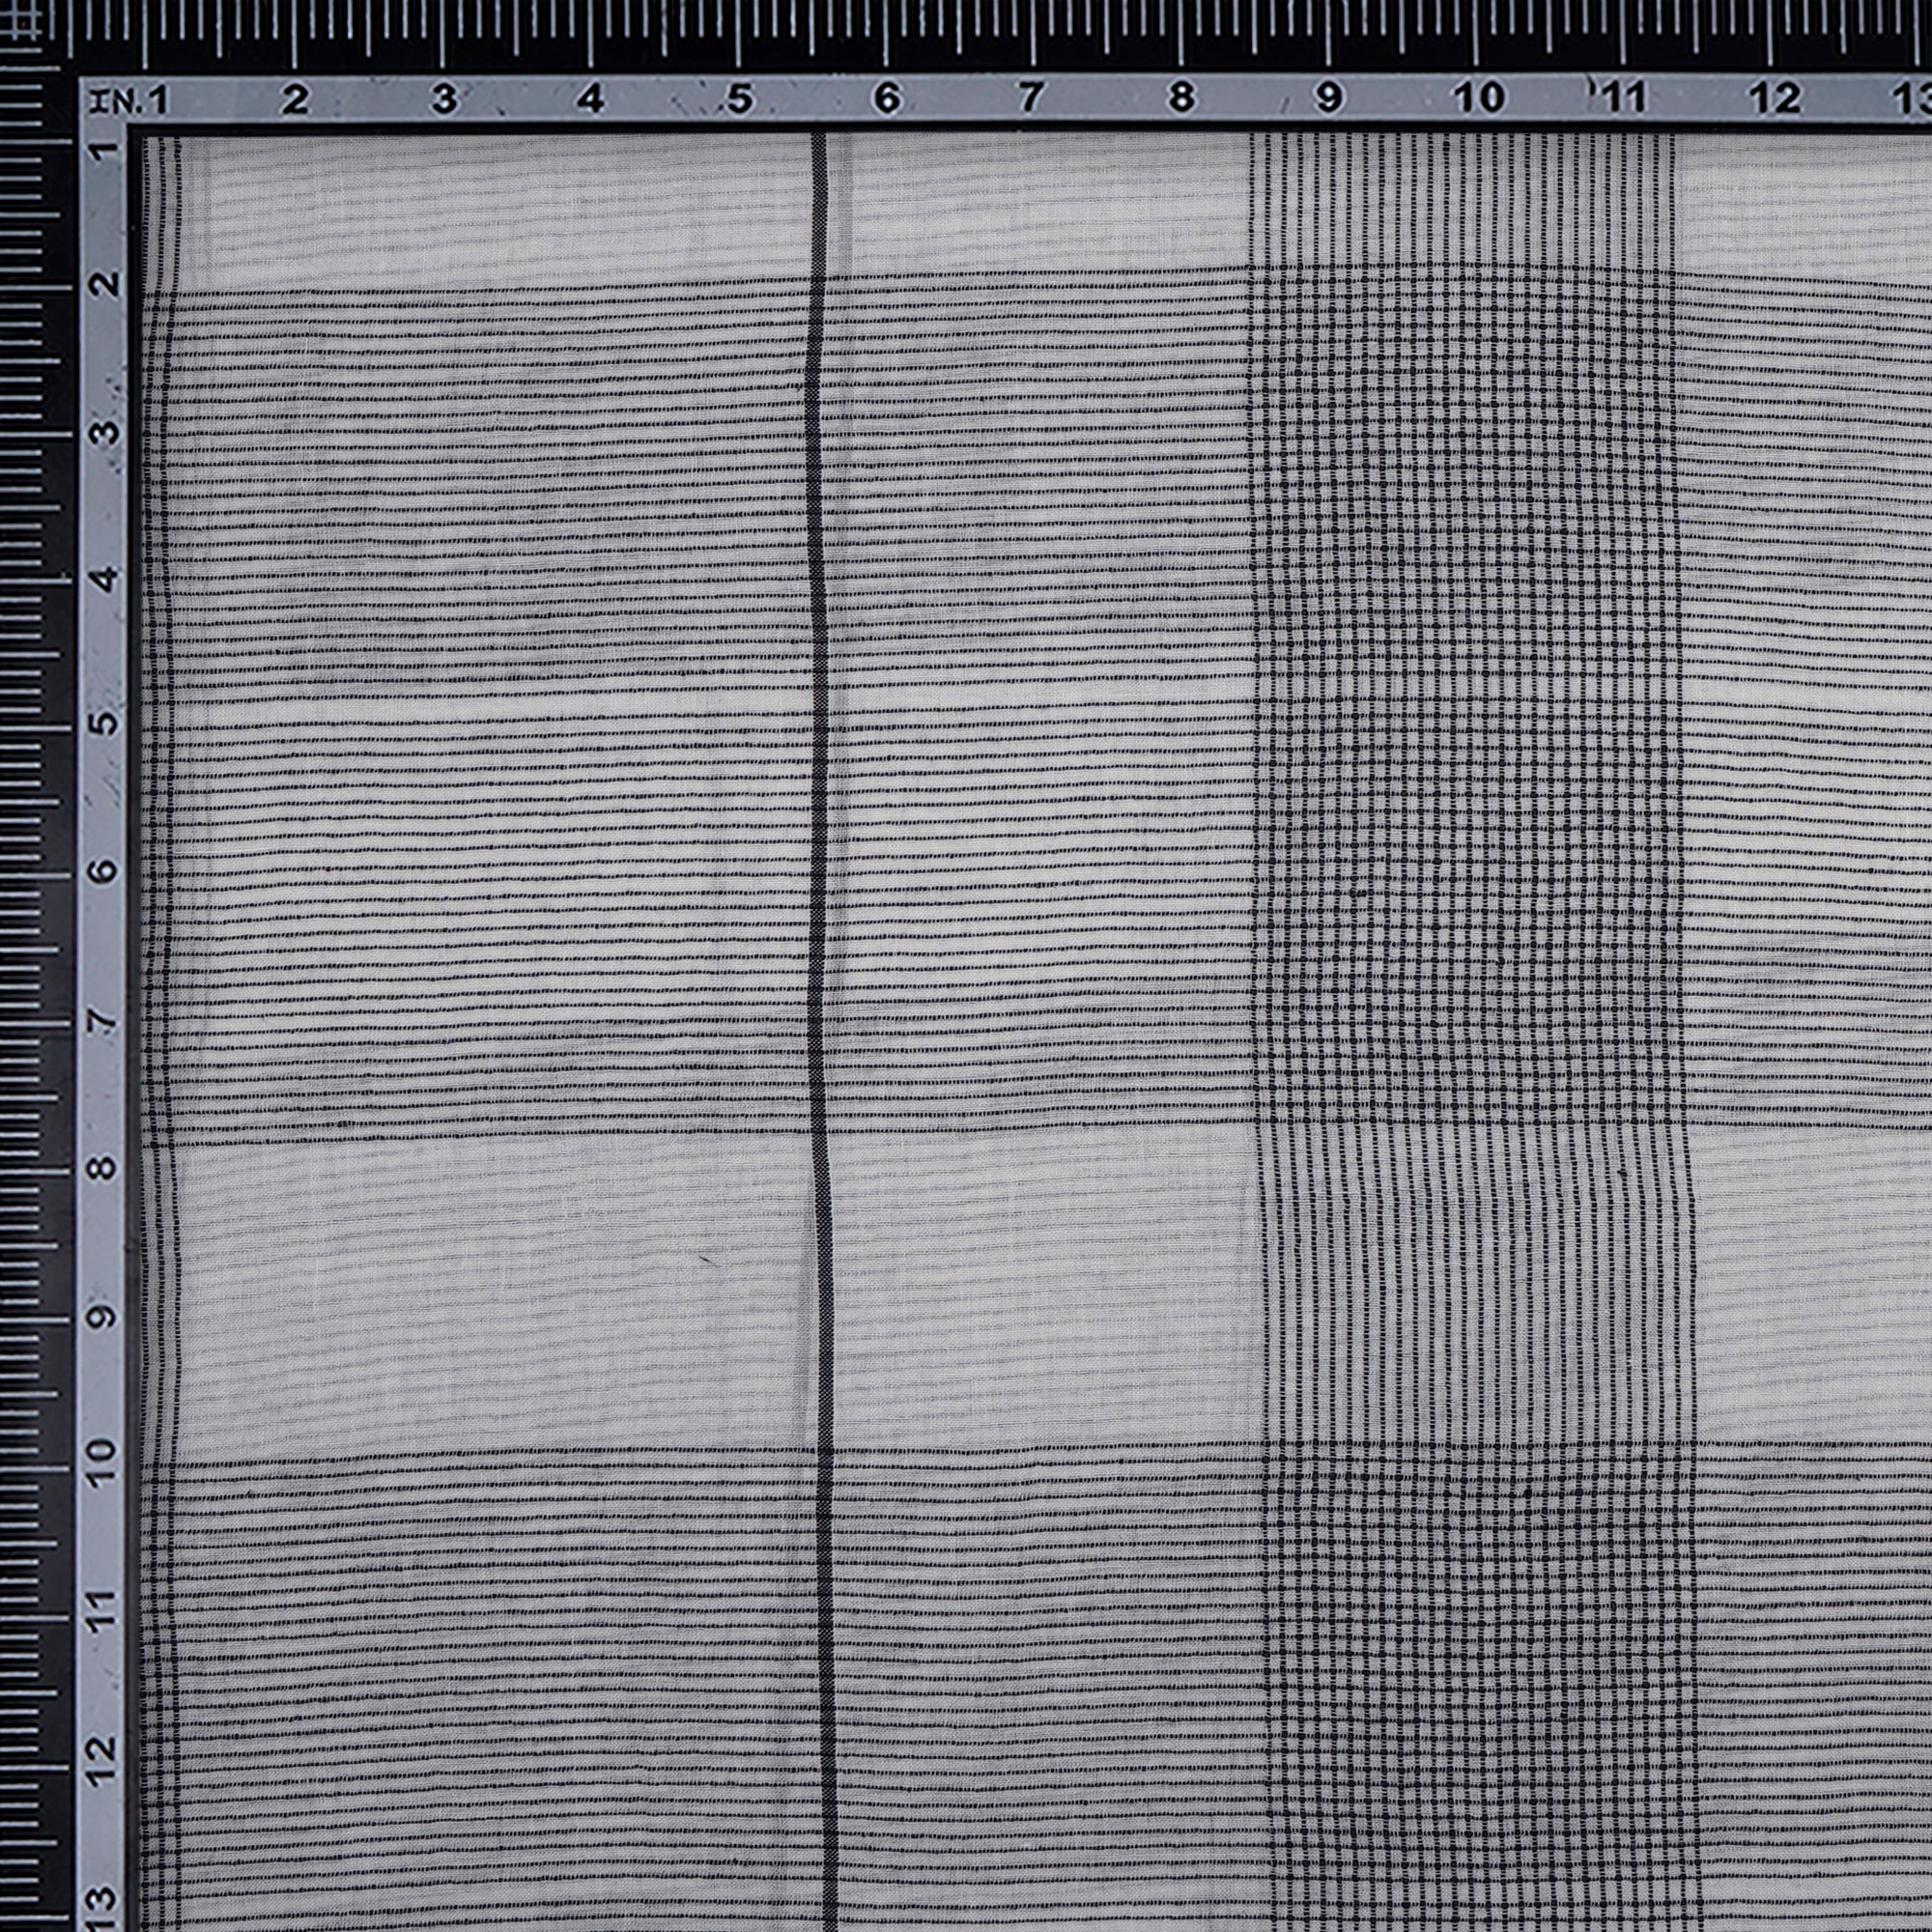 Off-White Striped Check Pattern Handwoven Muslin Cotton Fabric